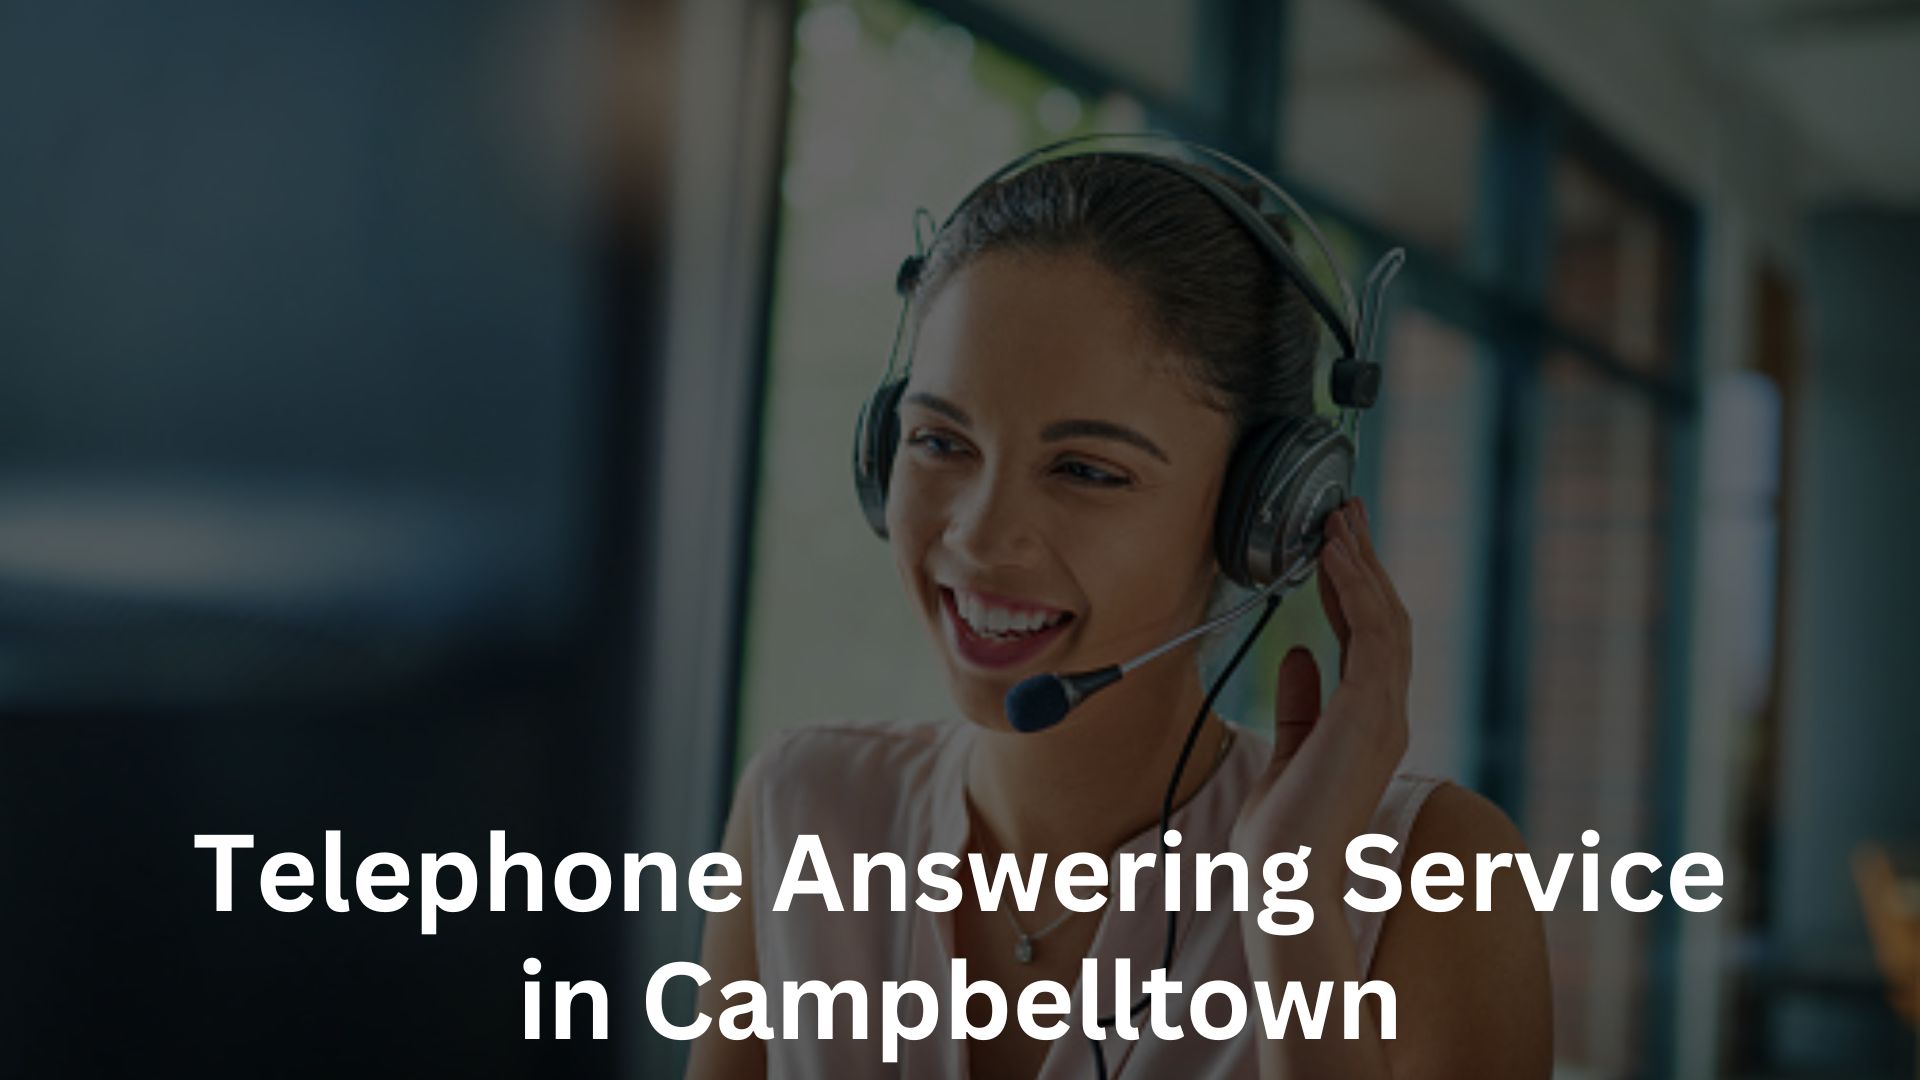 Telephone Answering Service in Campbelltown